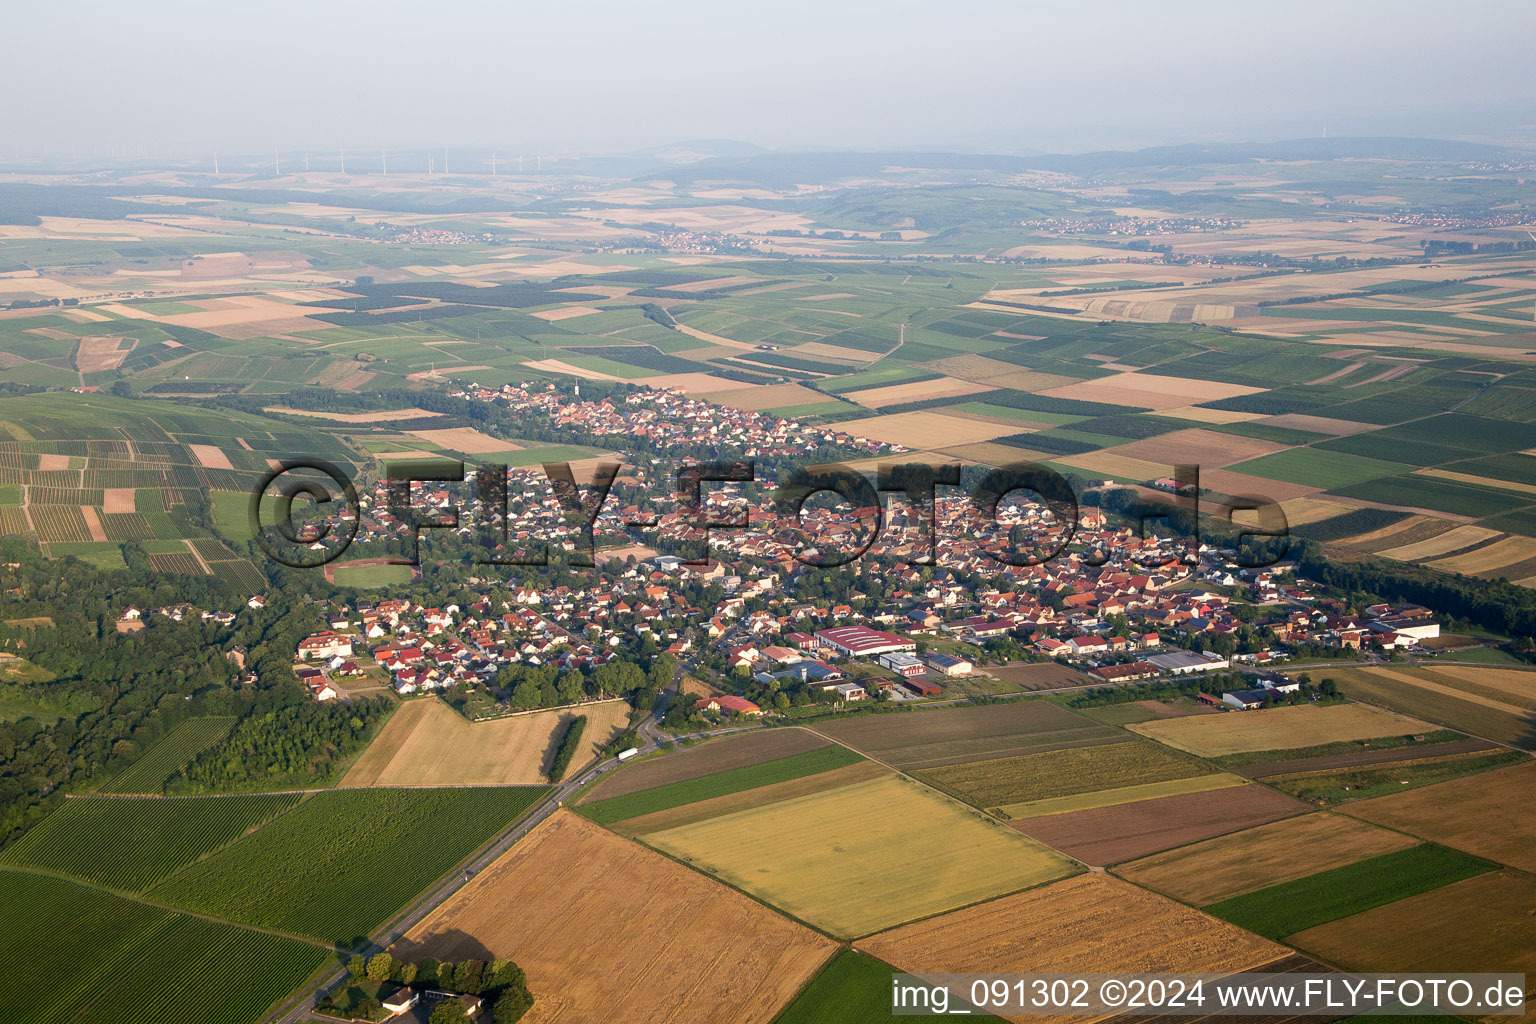 Aerial view of Village - view on the edge of agricultural fields and farmland in Flonheim in the state Rhineland-Palatinate, Germany